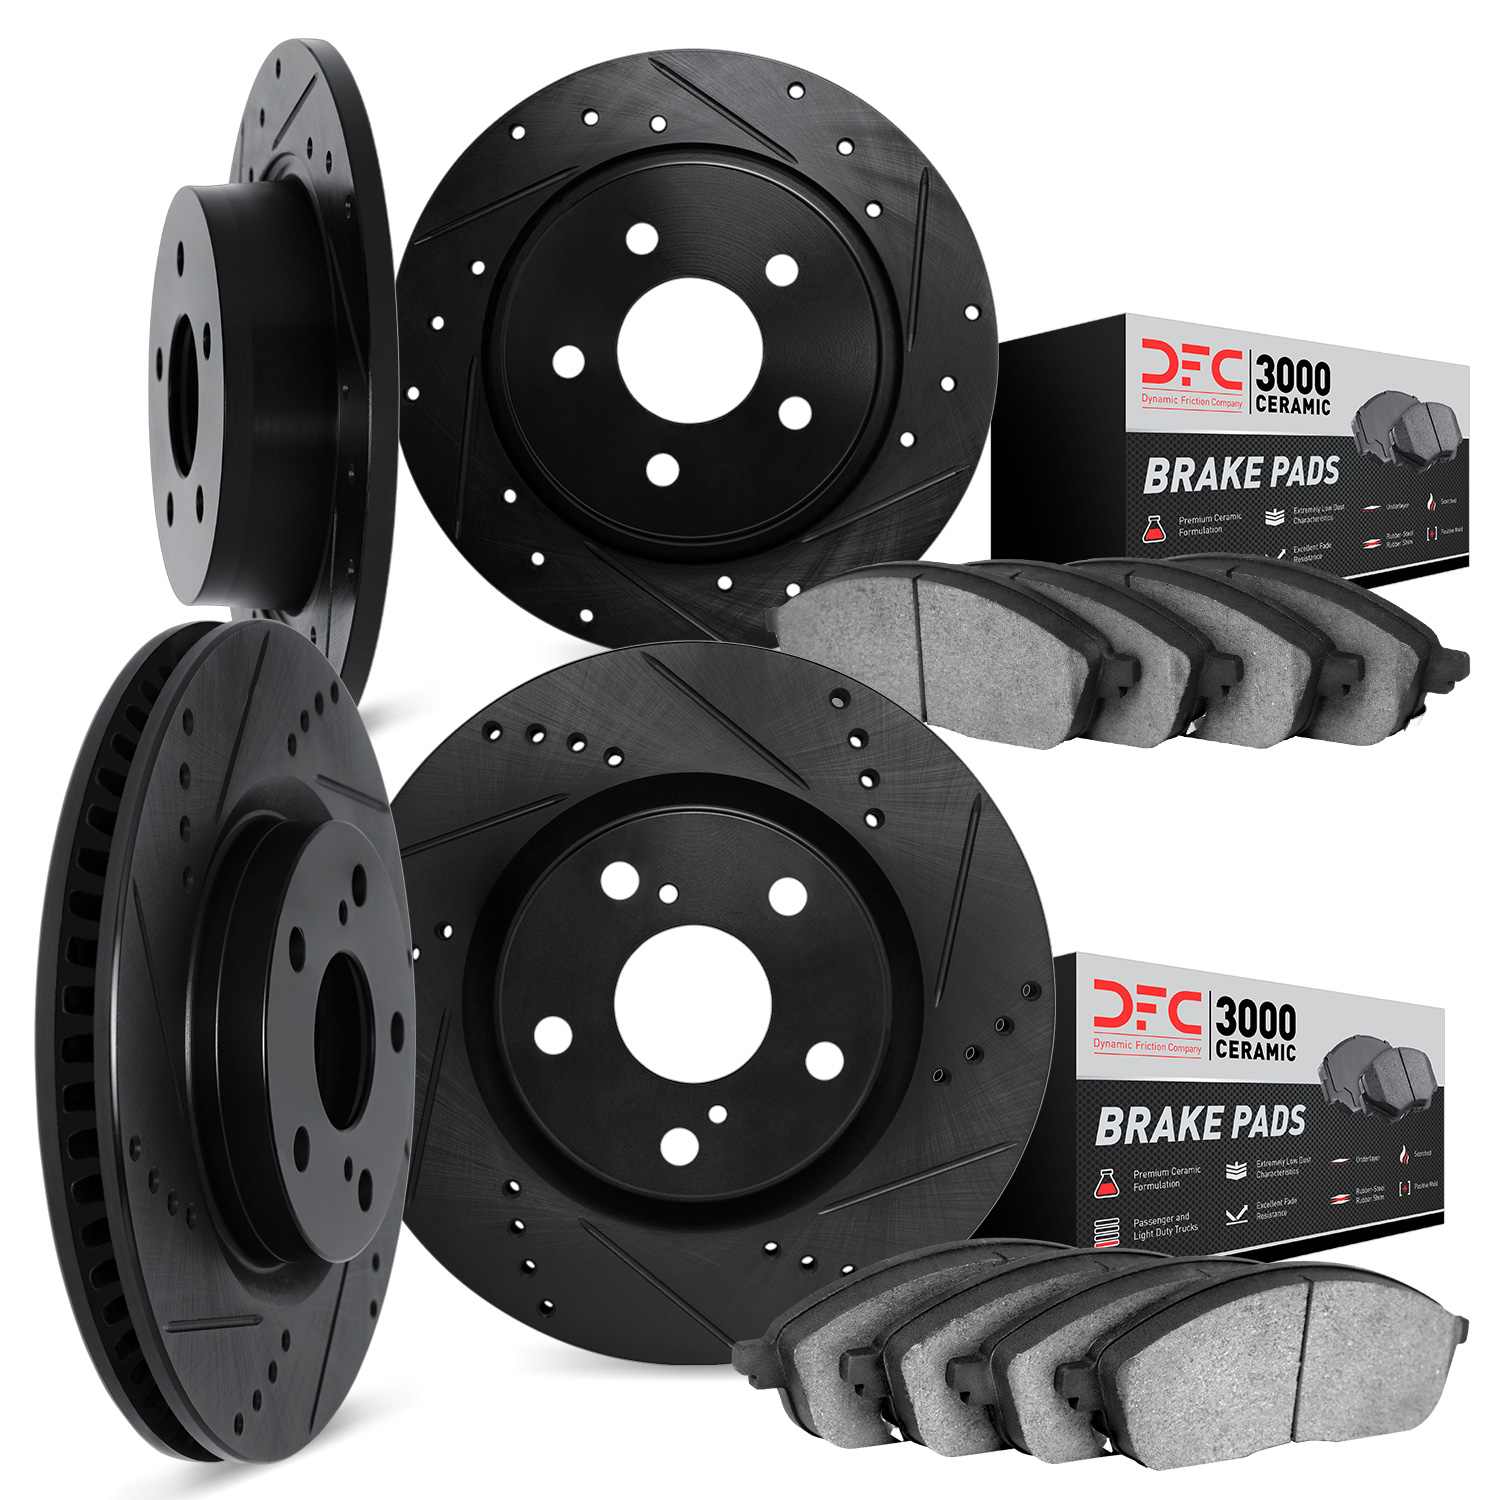 8304-59050 Drilled/Slotted Brake Rotors with 3000-Series Ceramic Brake Pads Kit [Black], 2013-2015 Acura/Honda, Position: Front